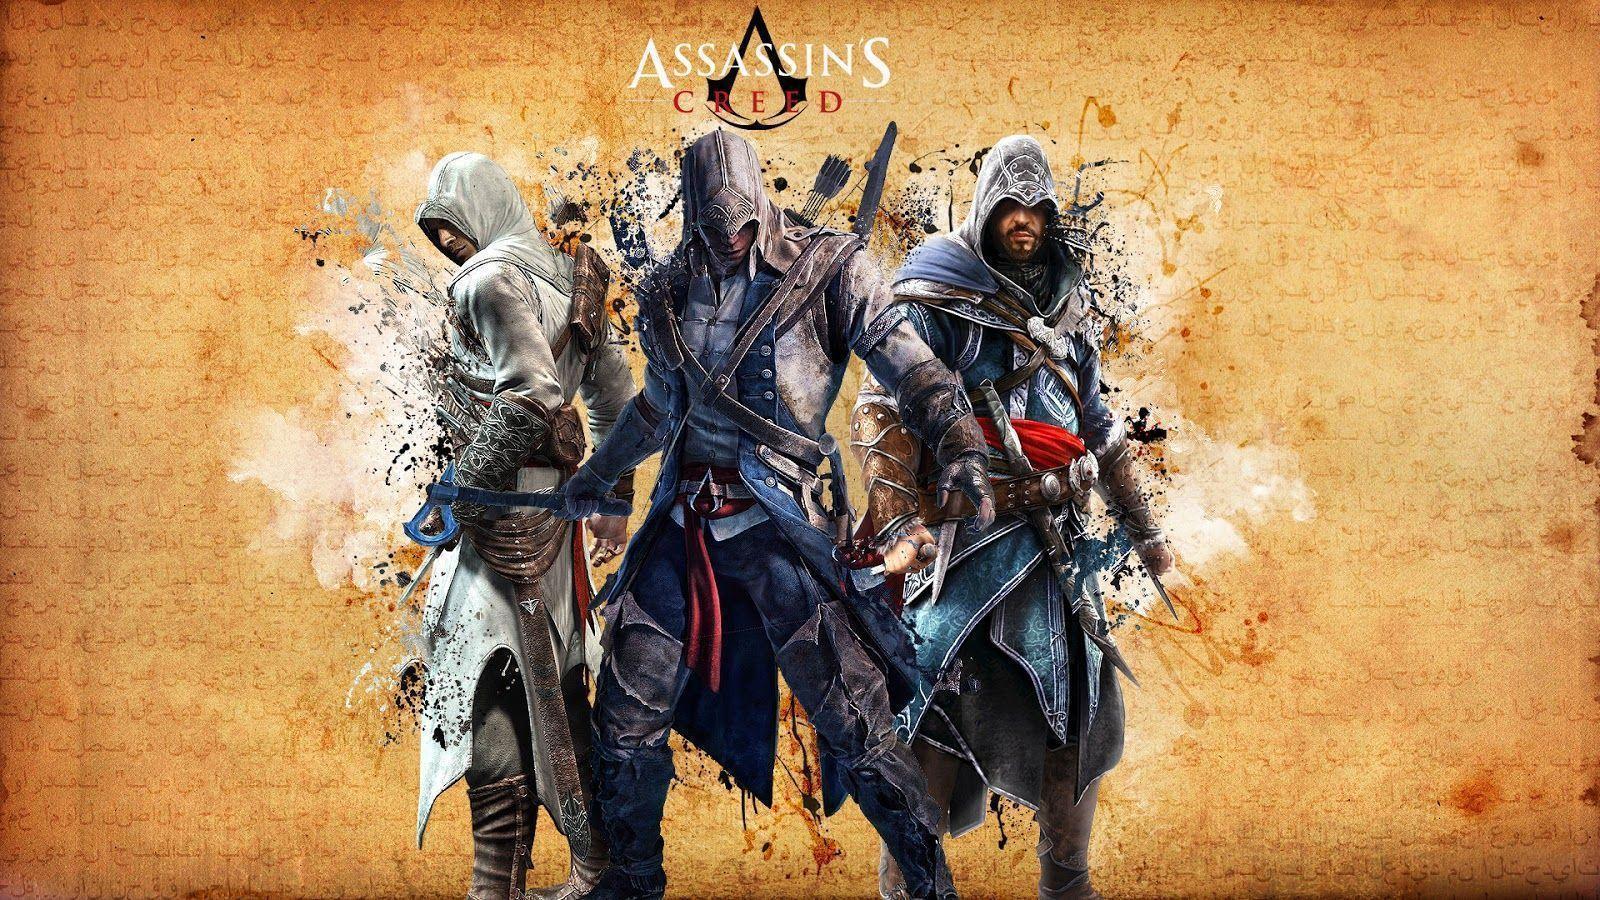 image For > Altair And Ezio Wallpaper